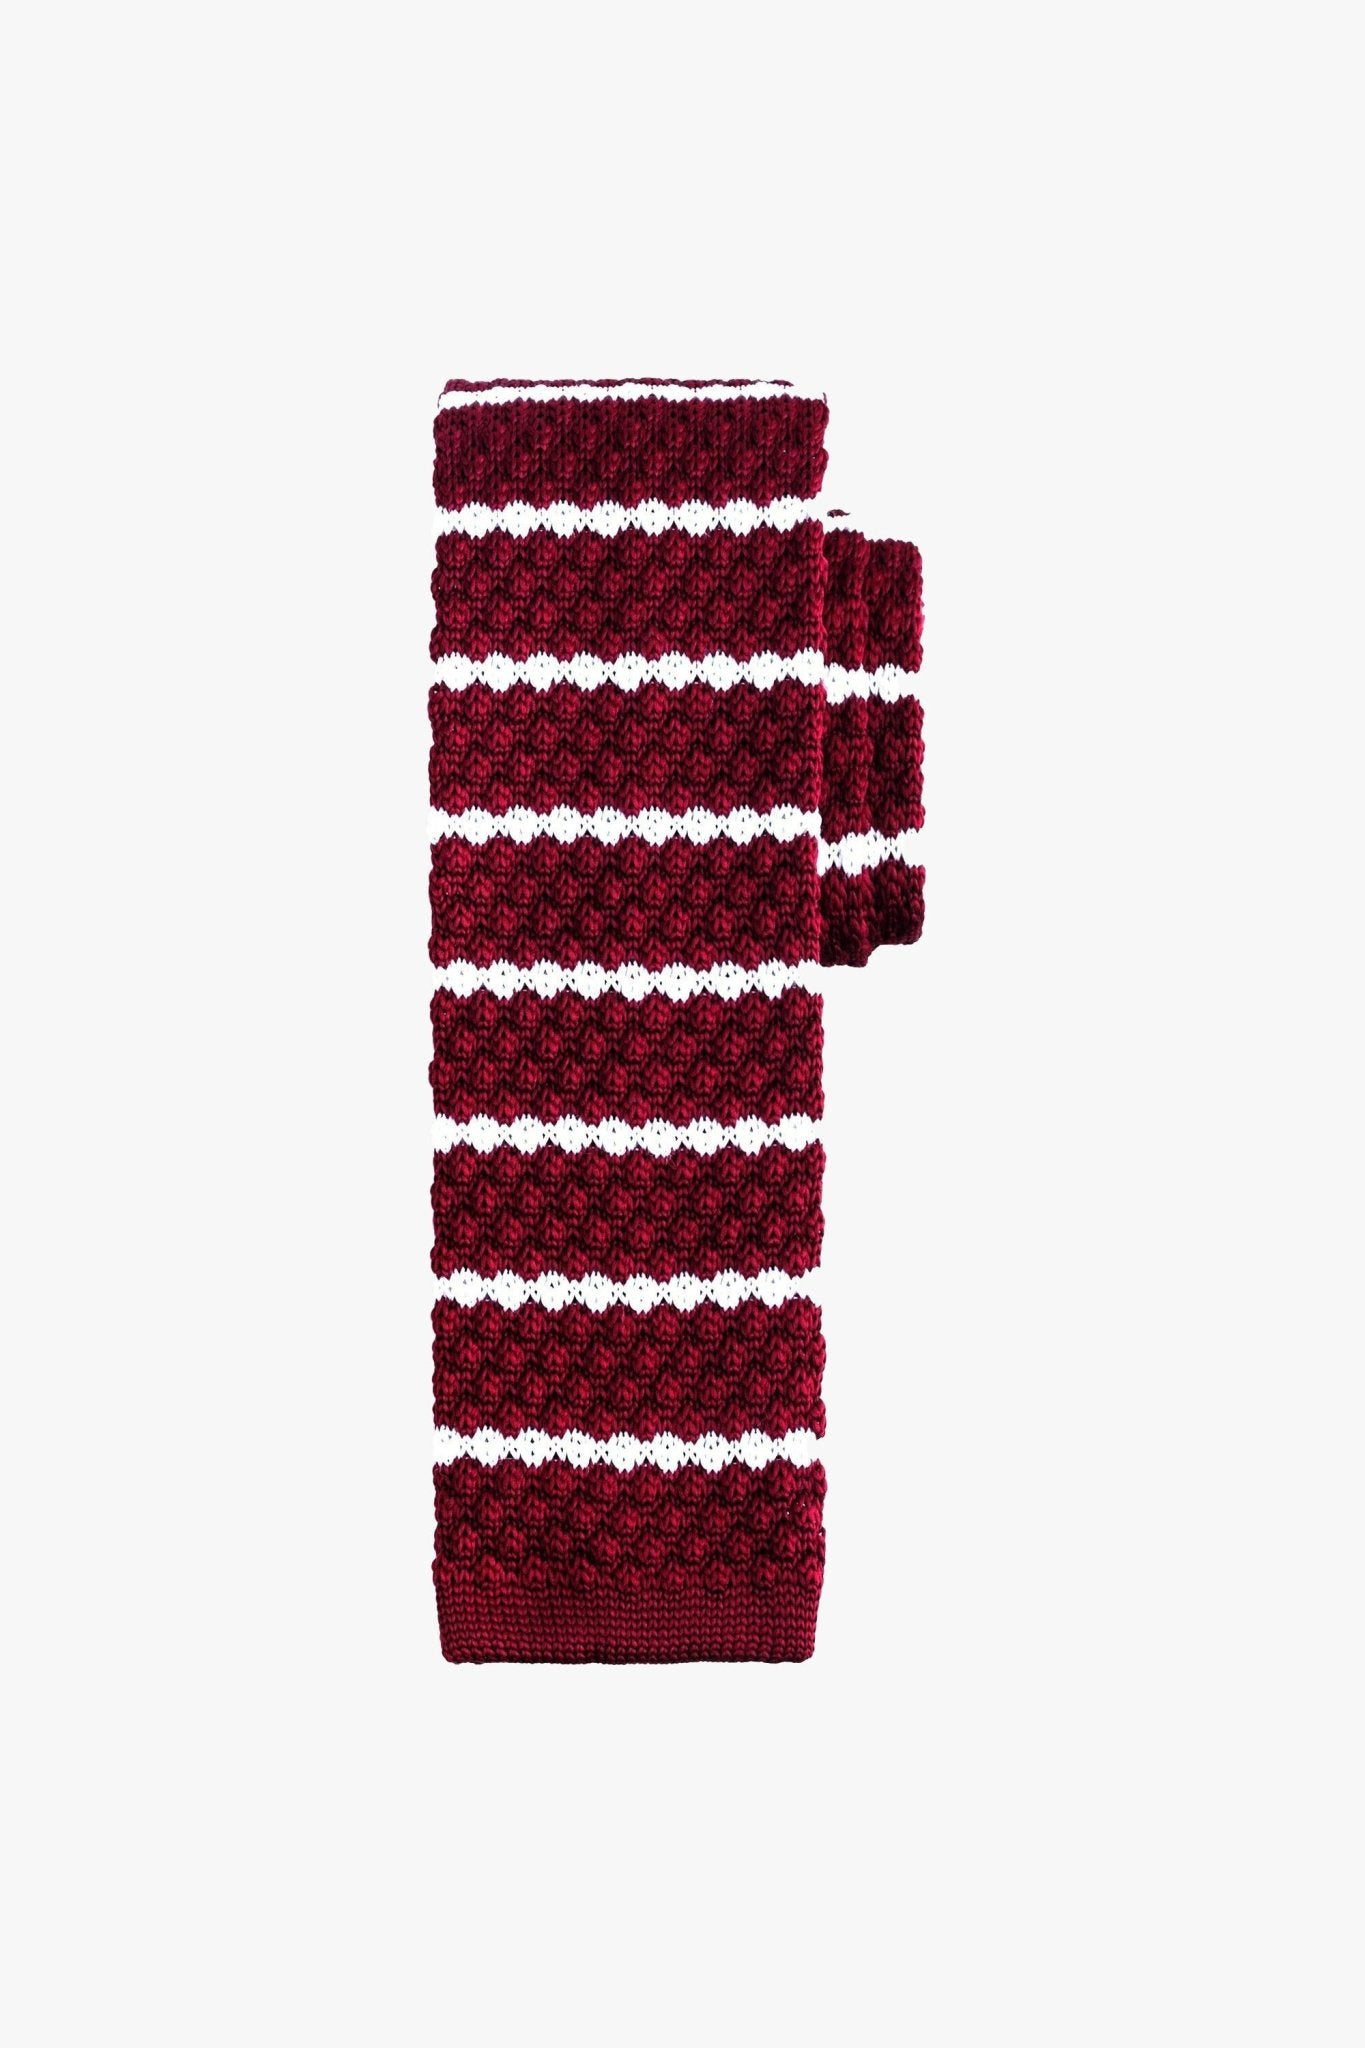 Red Stripe Knitted Tie - My Suited Life